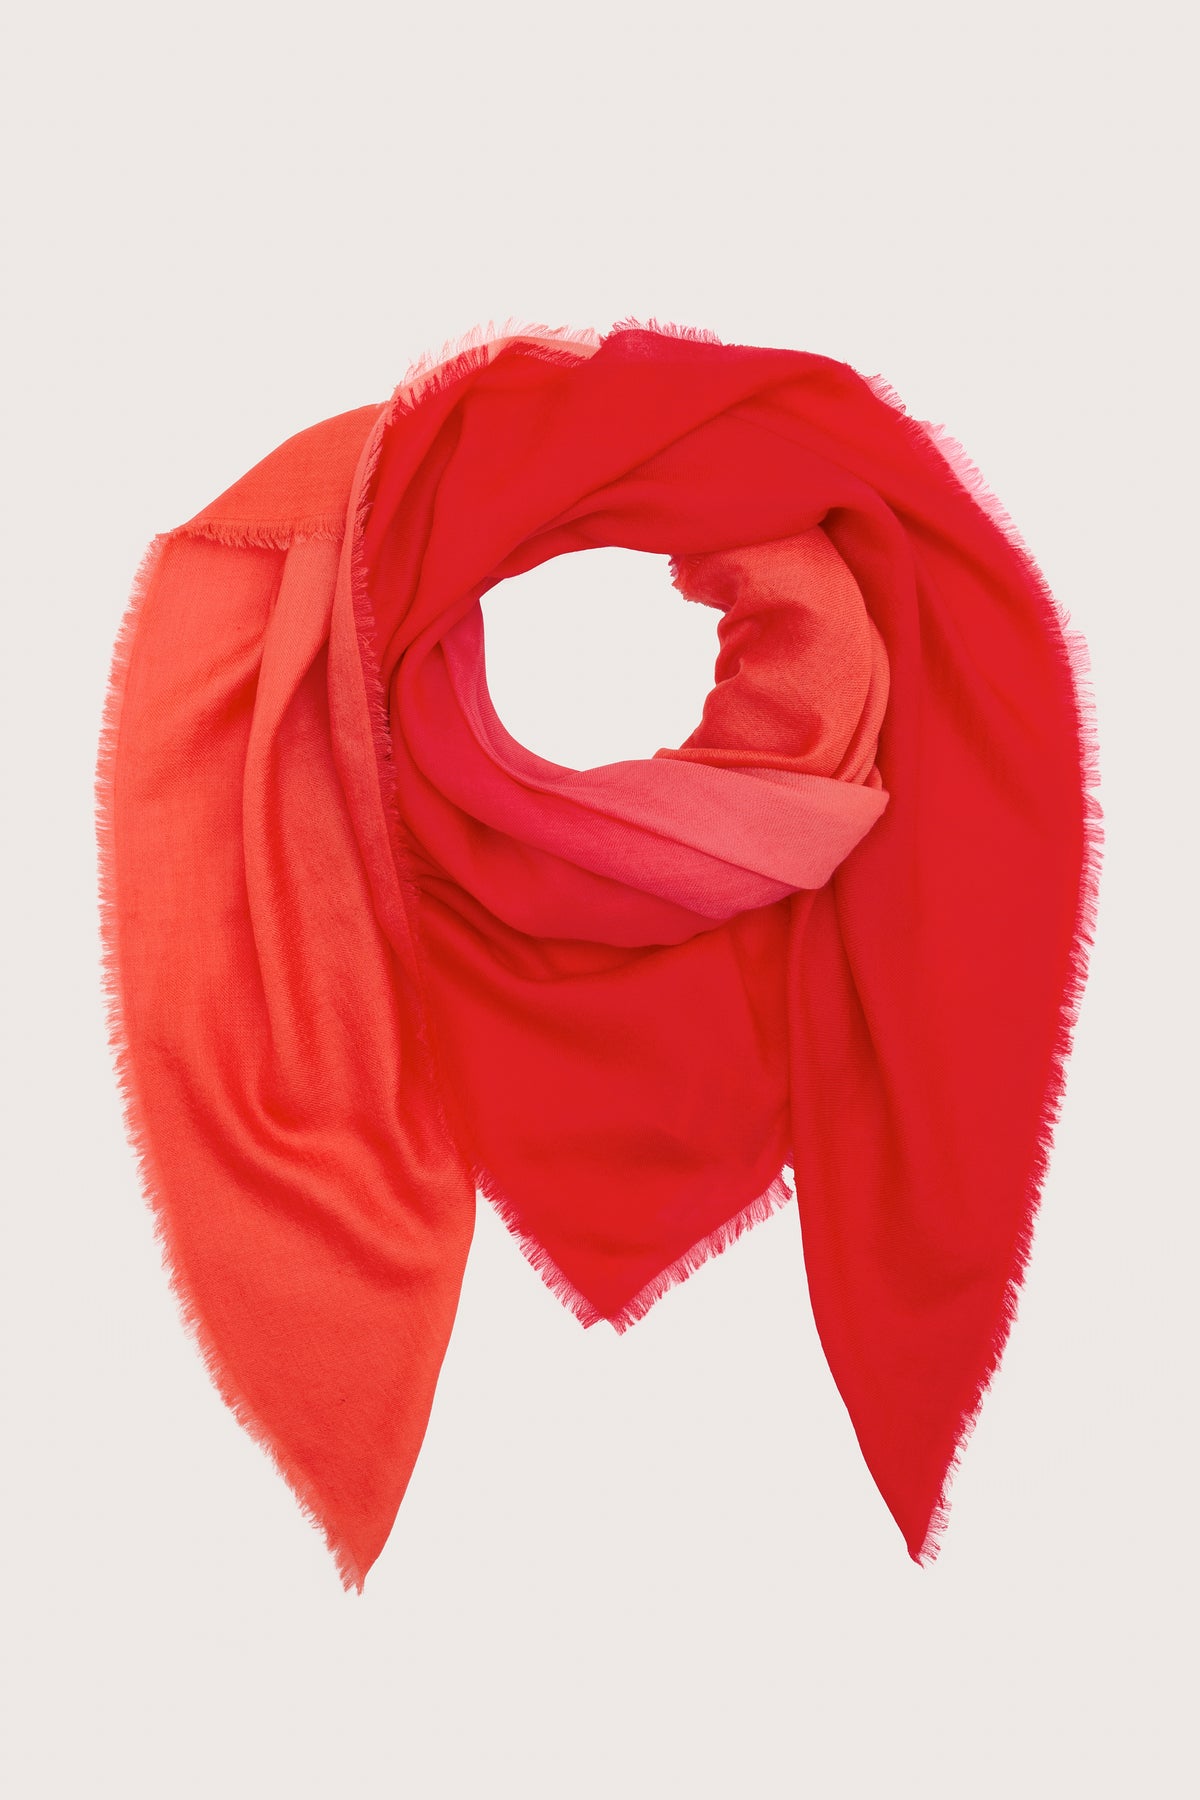 Tissue cashmere scarf in hot coral tones